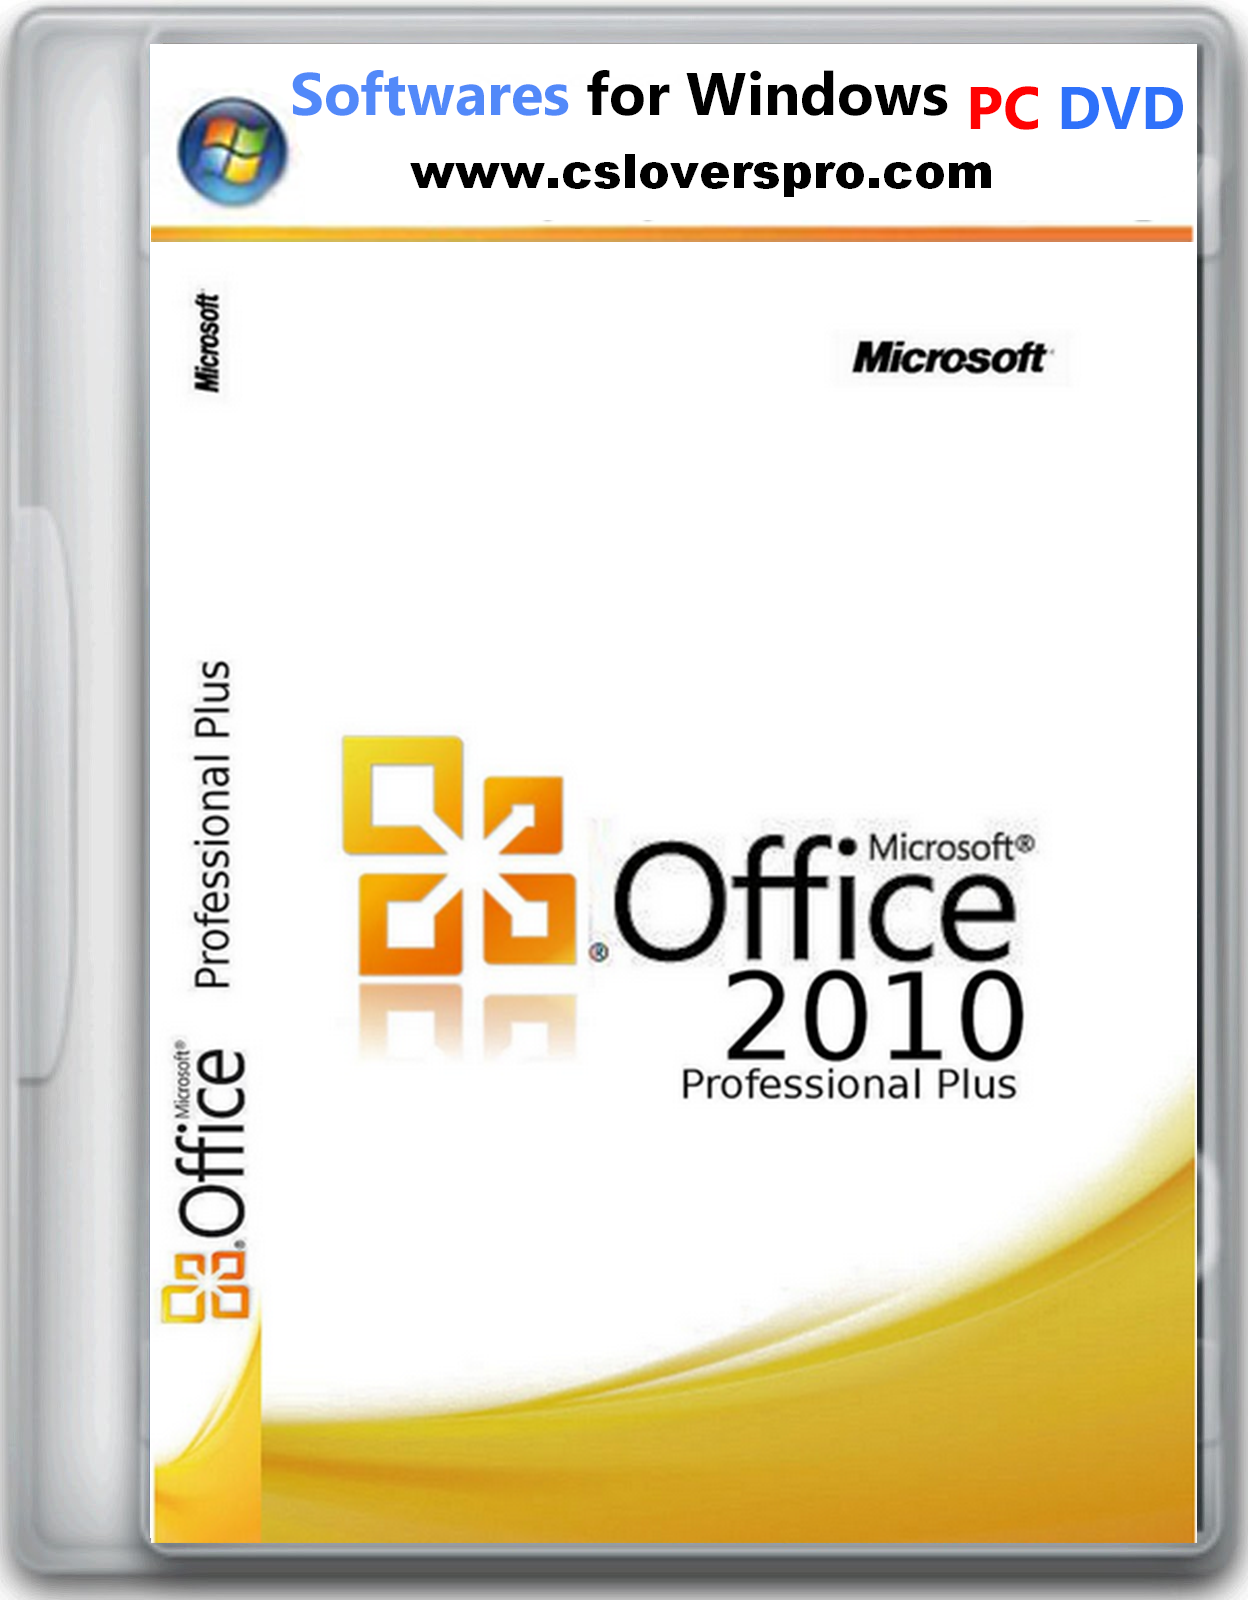 MICROSOFT OFFICE 2010 ACTIVATOR [thethingy] Full Version